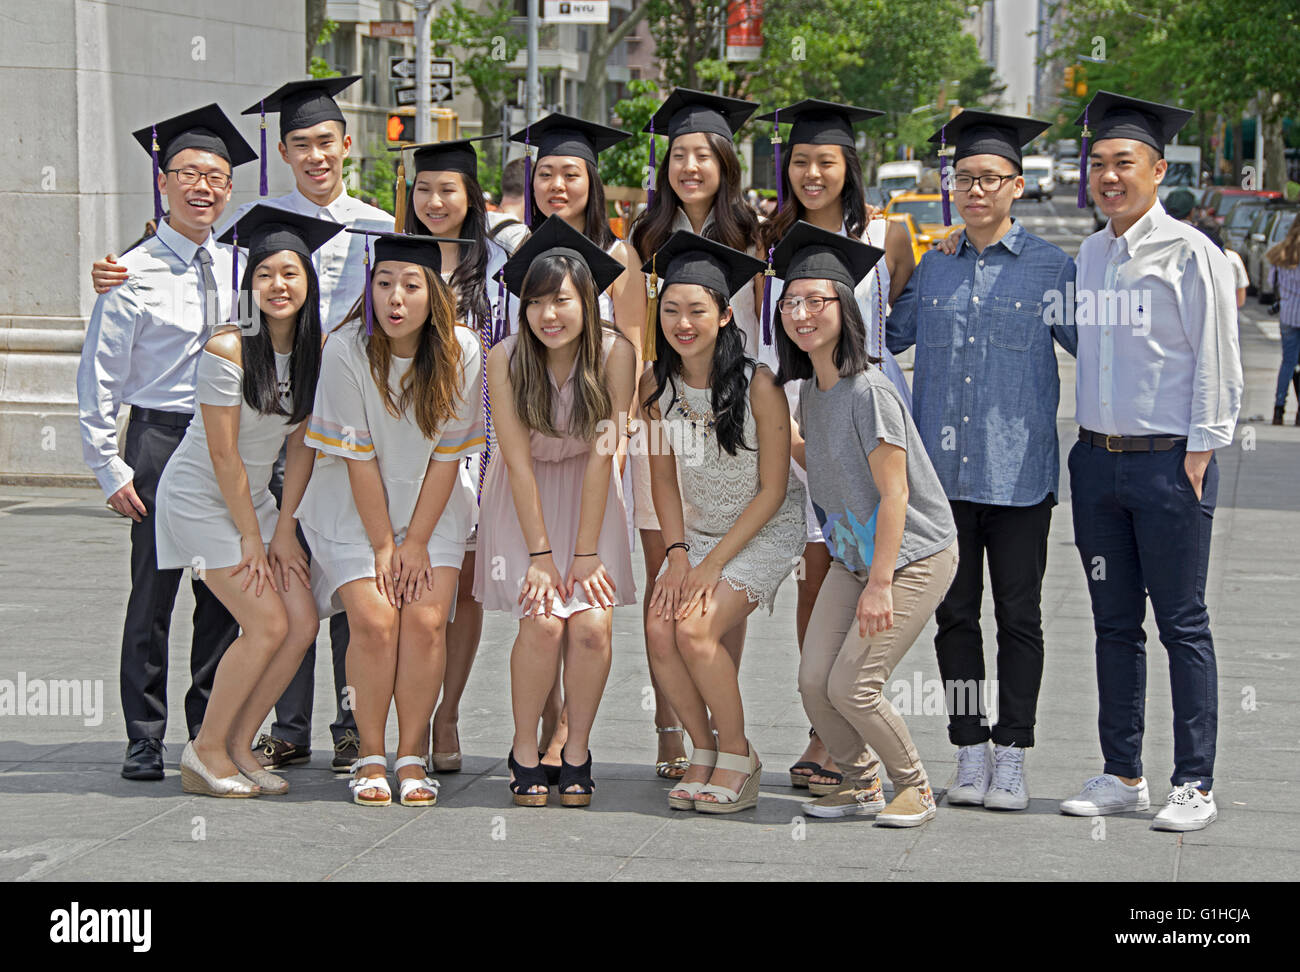 Asian NYU graduates wearing their graduation caps pose for a group photo in Washington Square Park in New York City Stock Photo